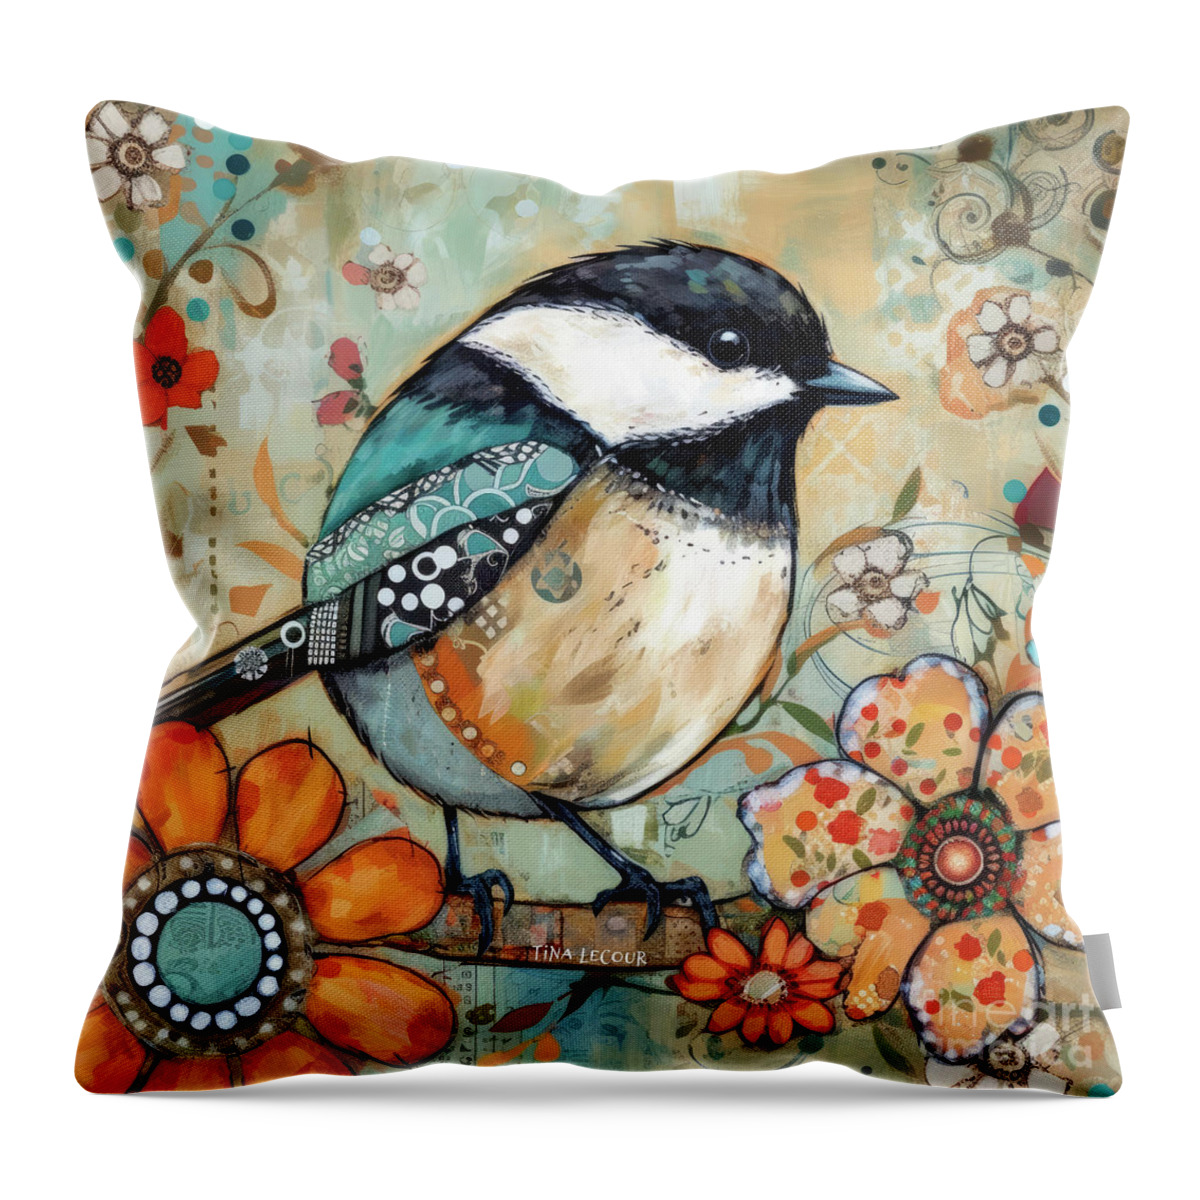 Black Capped Chickadee Throw Pillow featuring the painting Whimsical Black Capped Chickadee by Tina LeCour